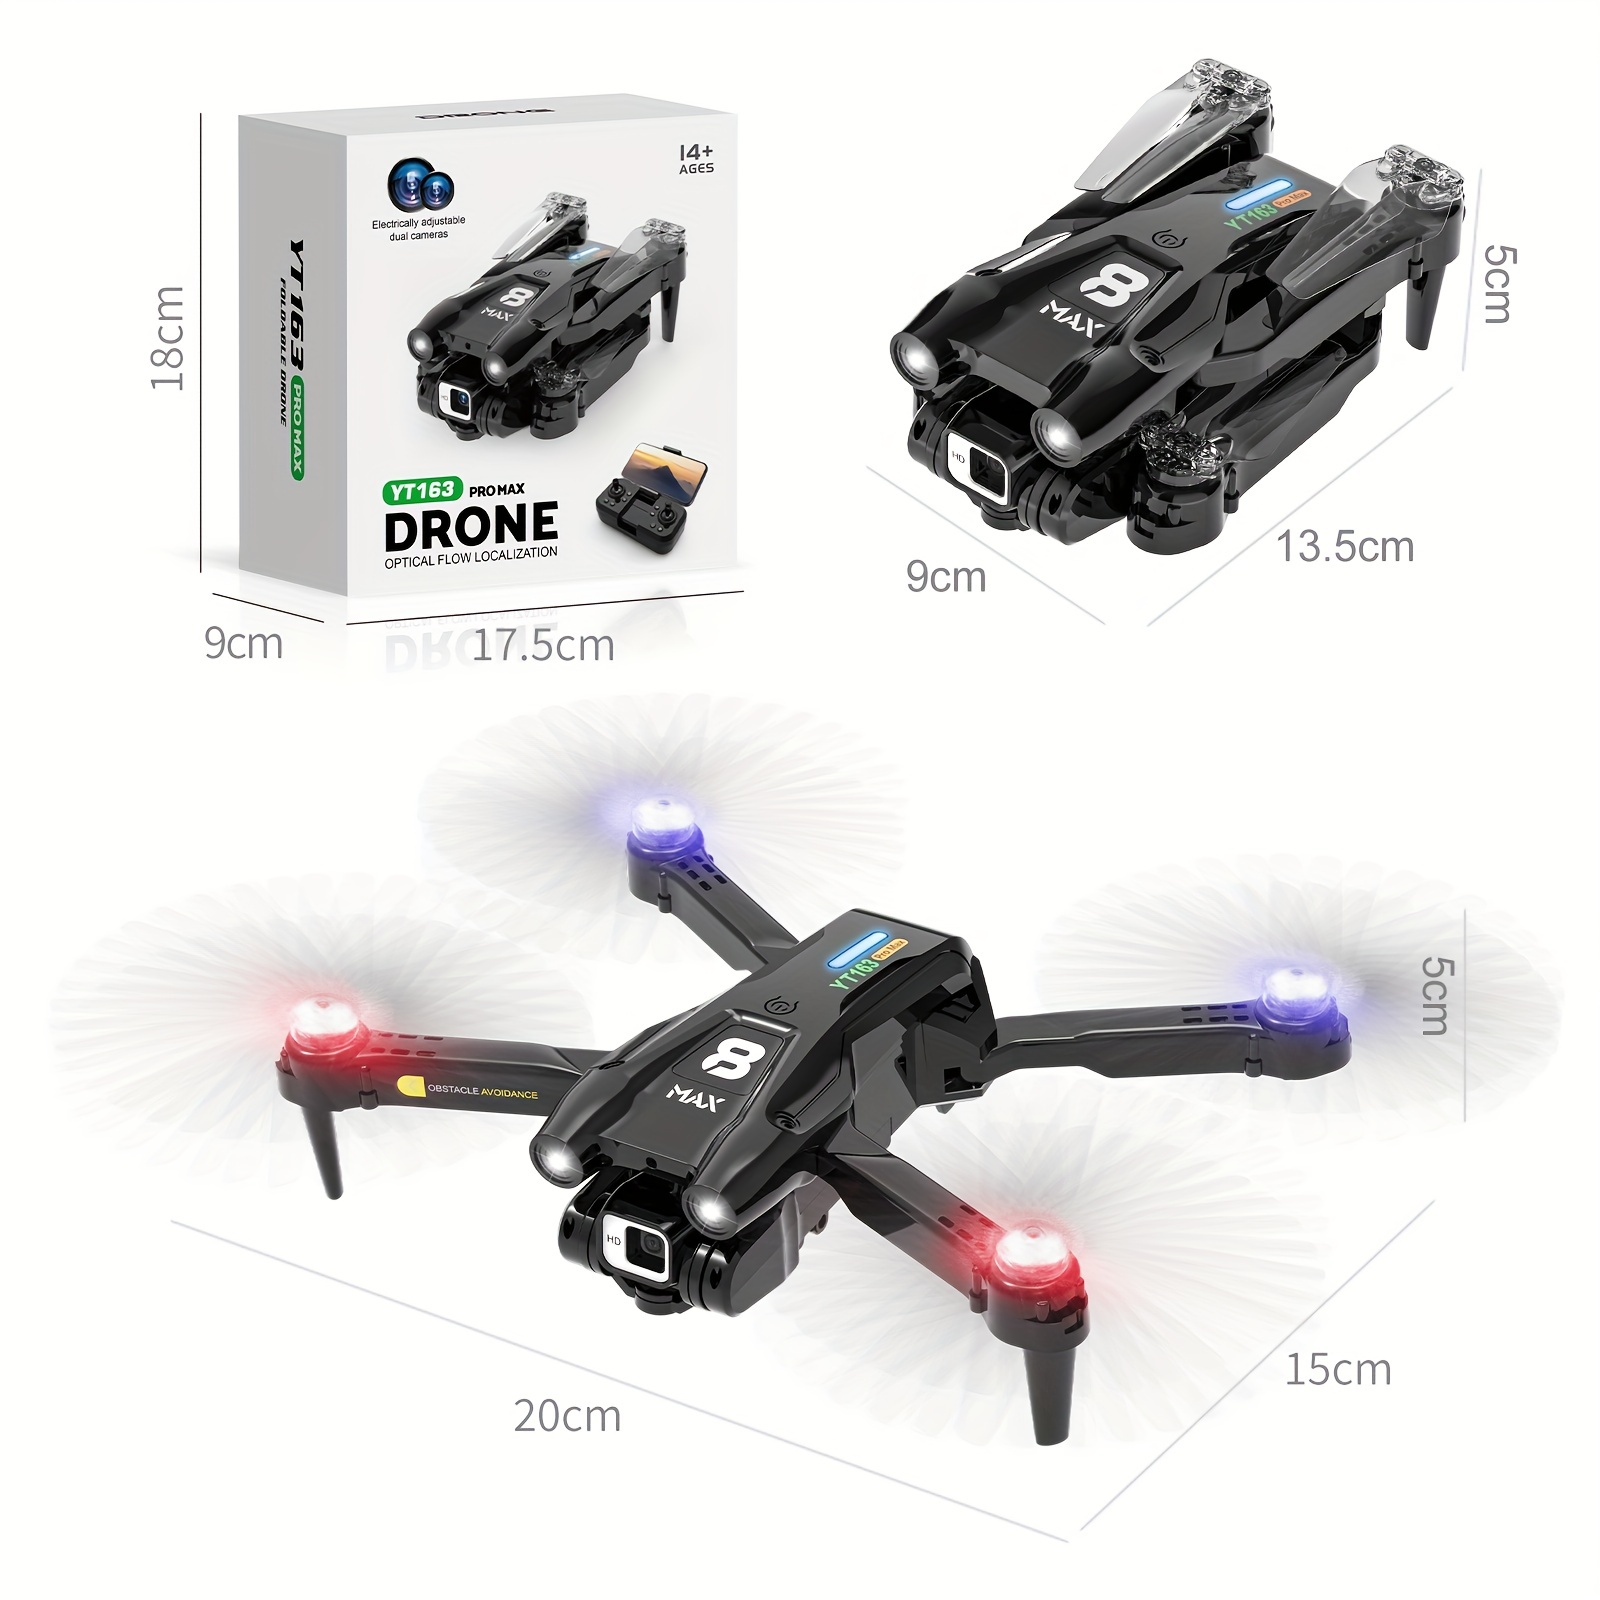 yt163 foldable drone remote control and app control easy to carry four sided sensor obstacle avoidance stable flight one key return high definition camera camera angle adjustable drone details 19